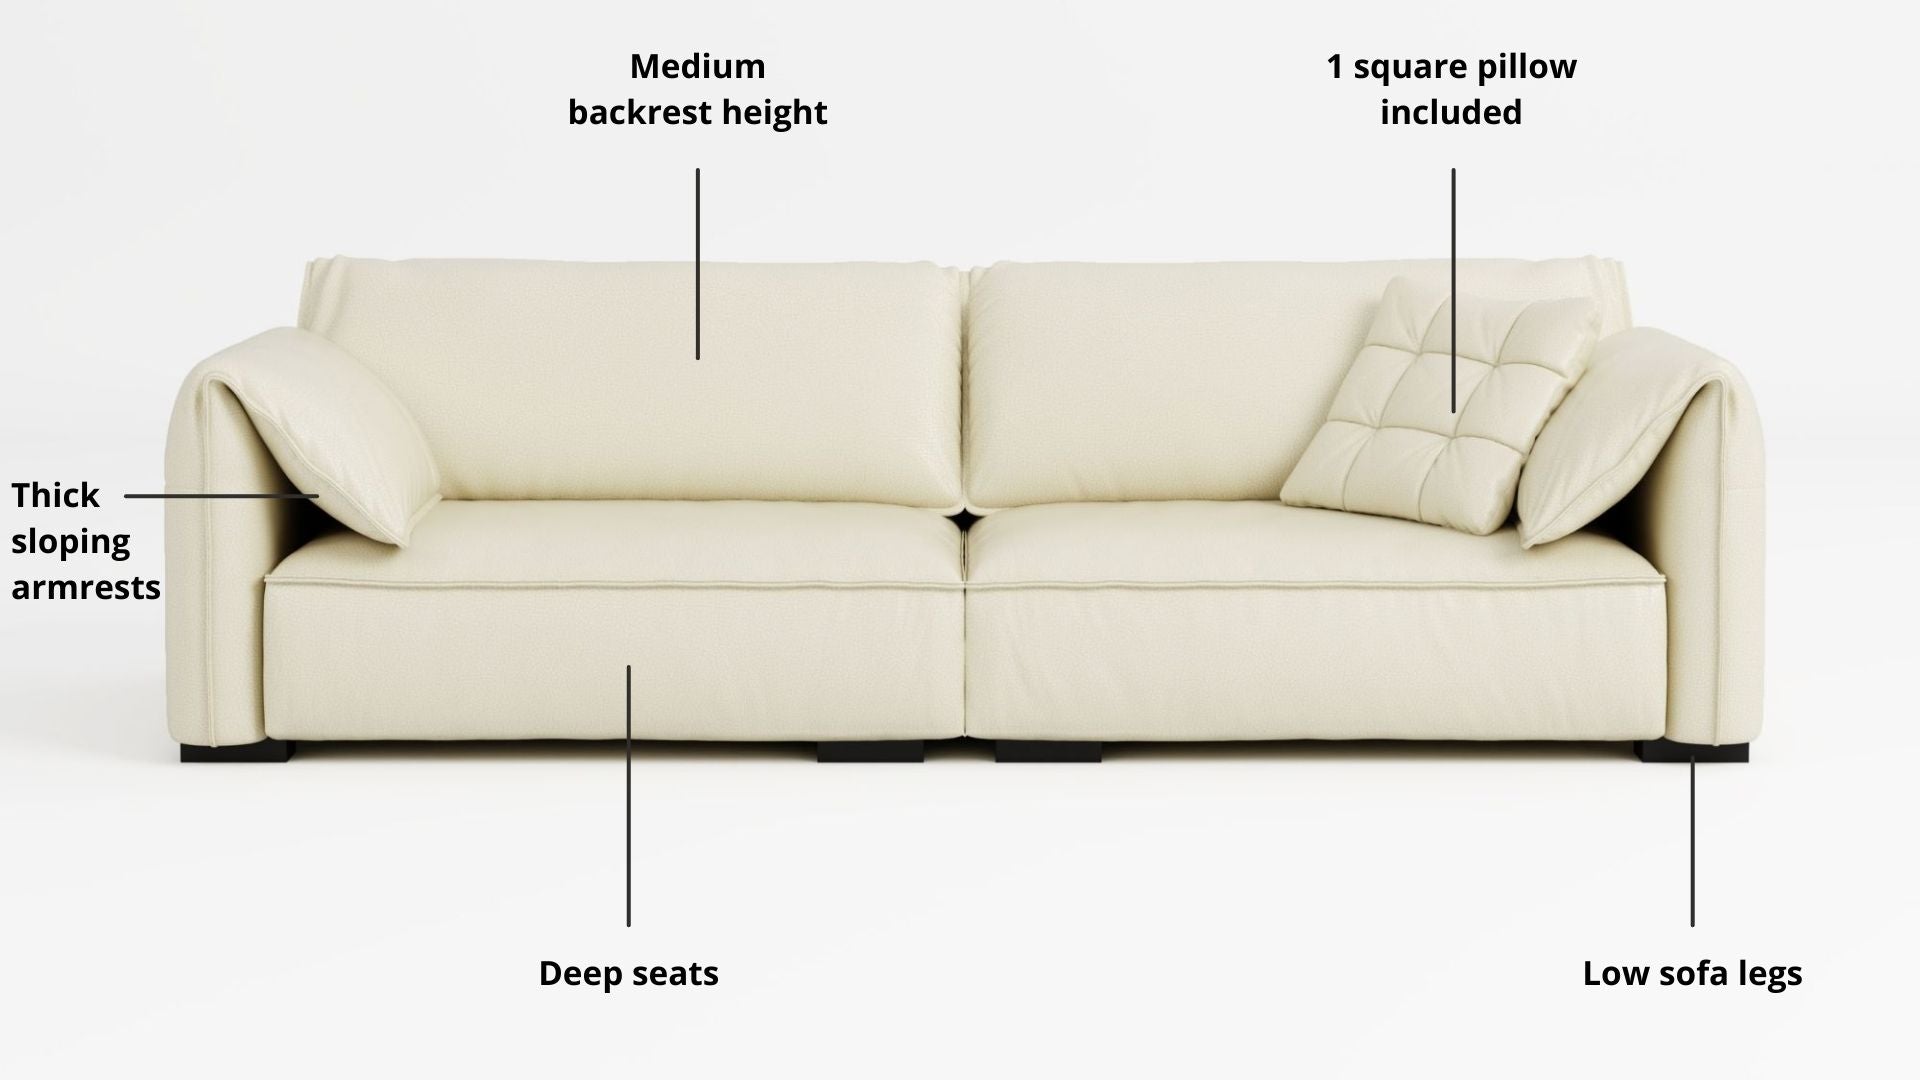 Key features such as armrest thickness, cushion height, seat depth and sofa leg height for Comfy Full Leather Sofa